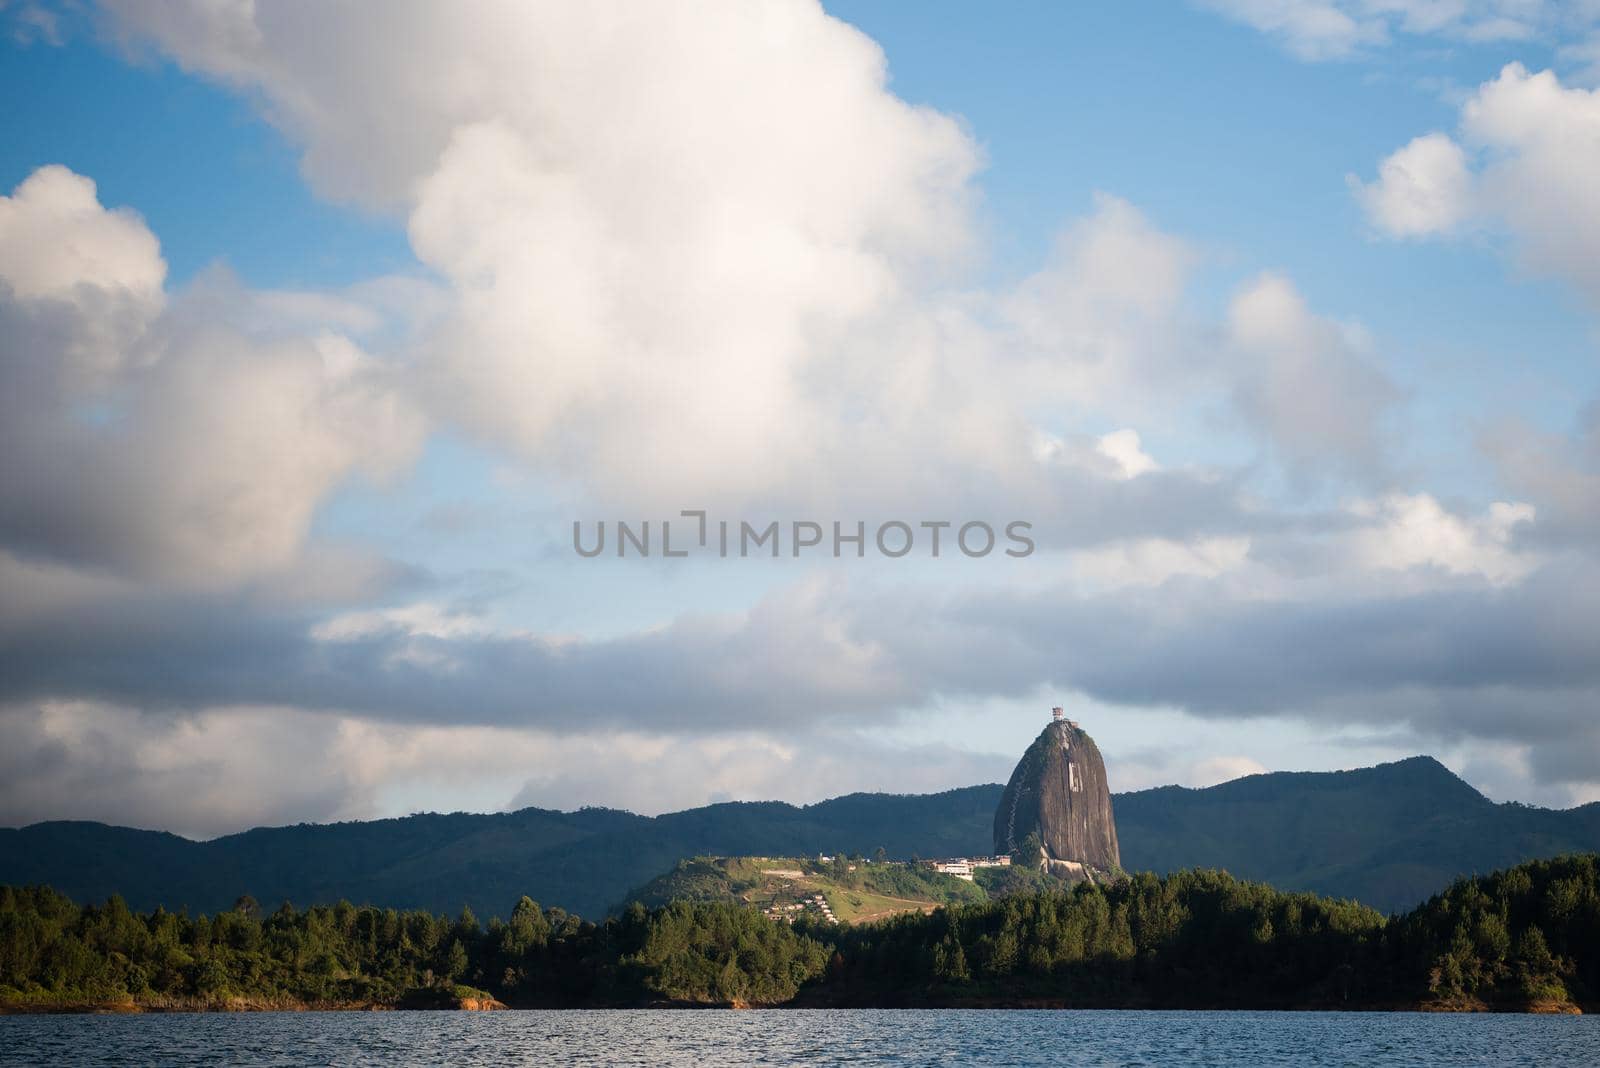 View of El Penon de Guatape in the distance from the water.